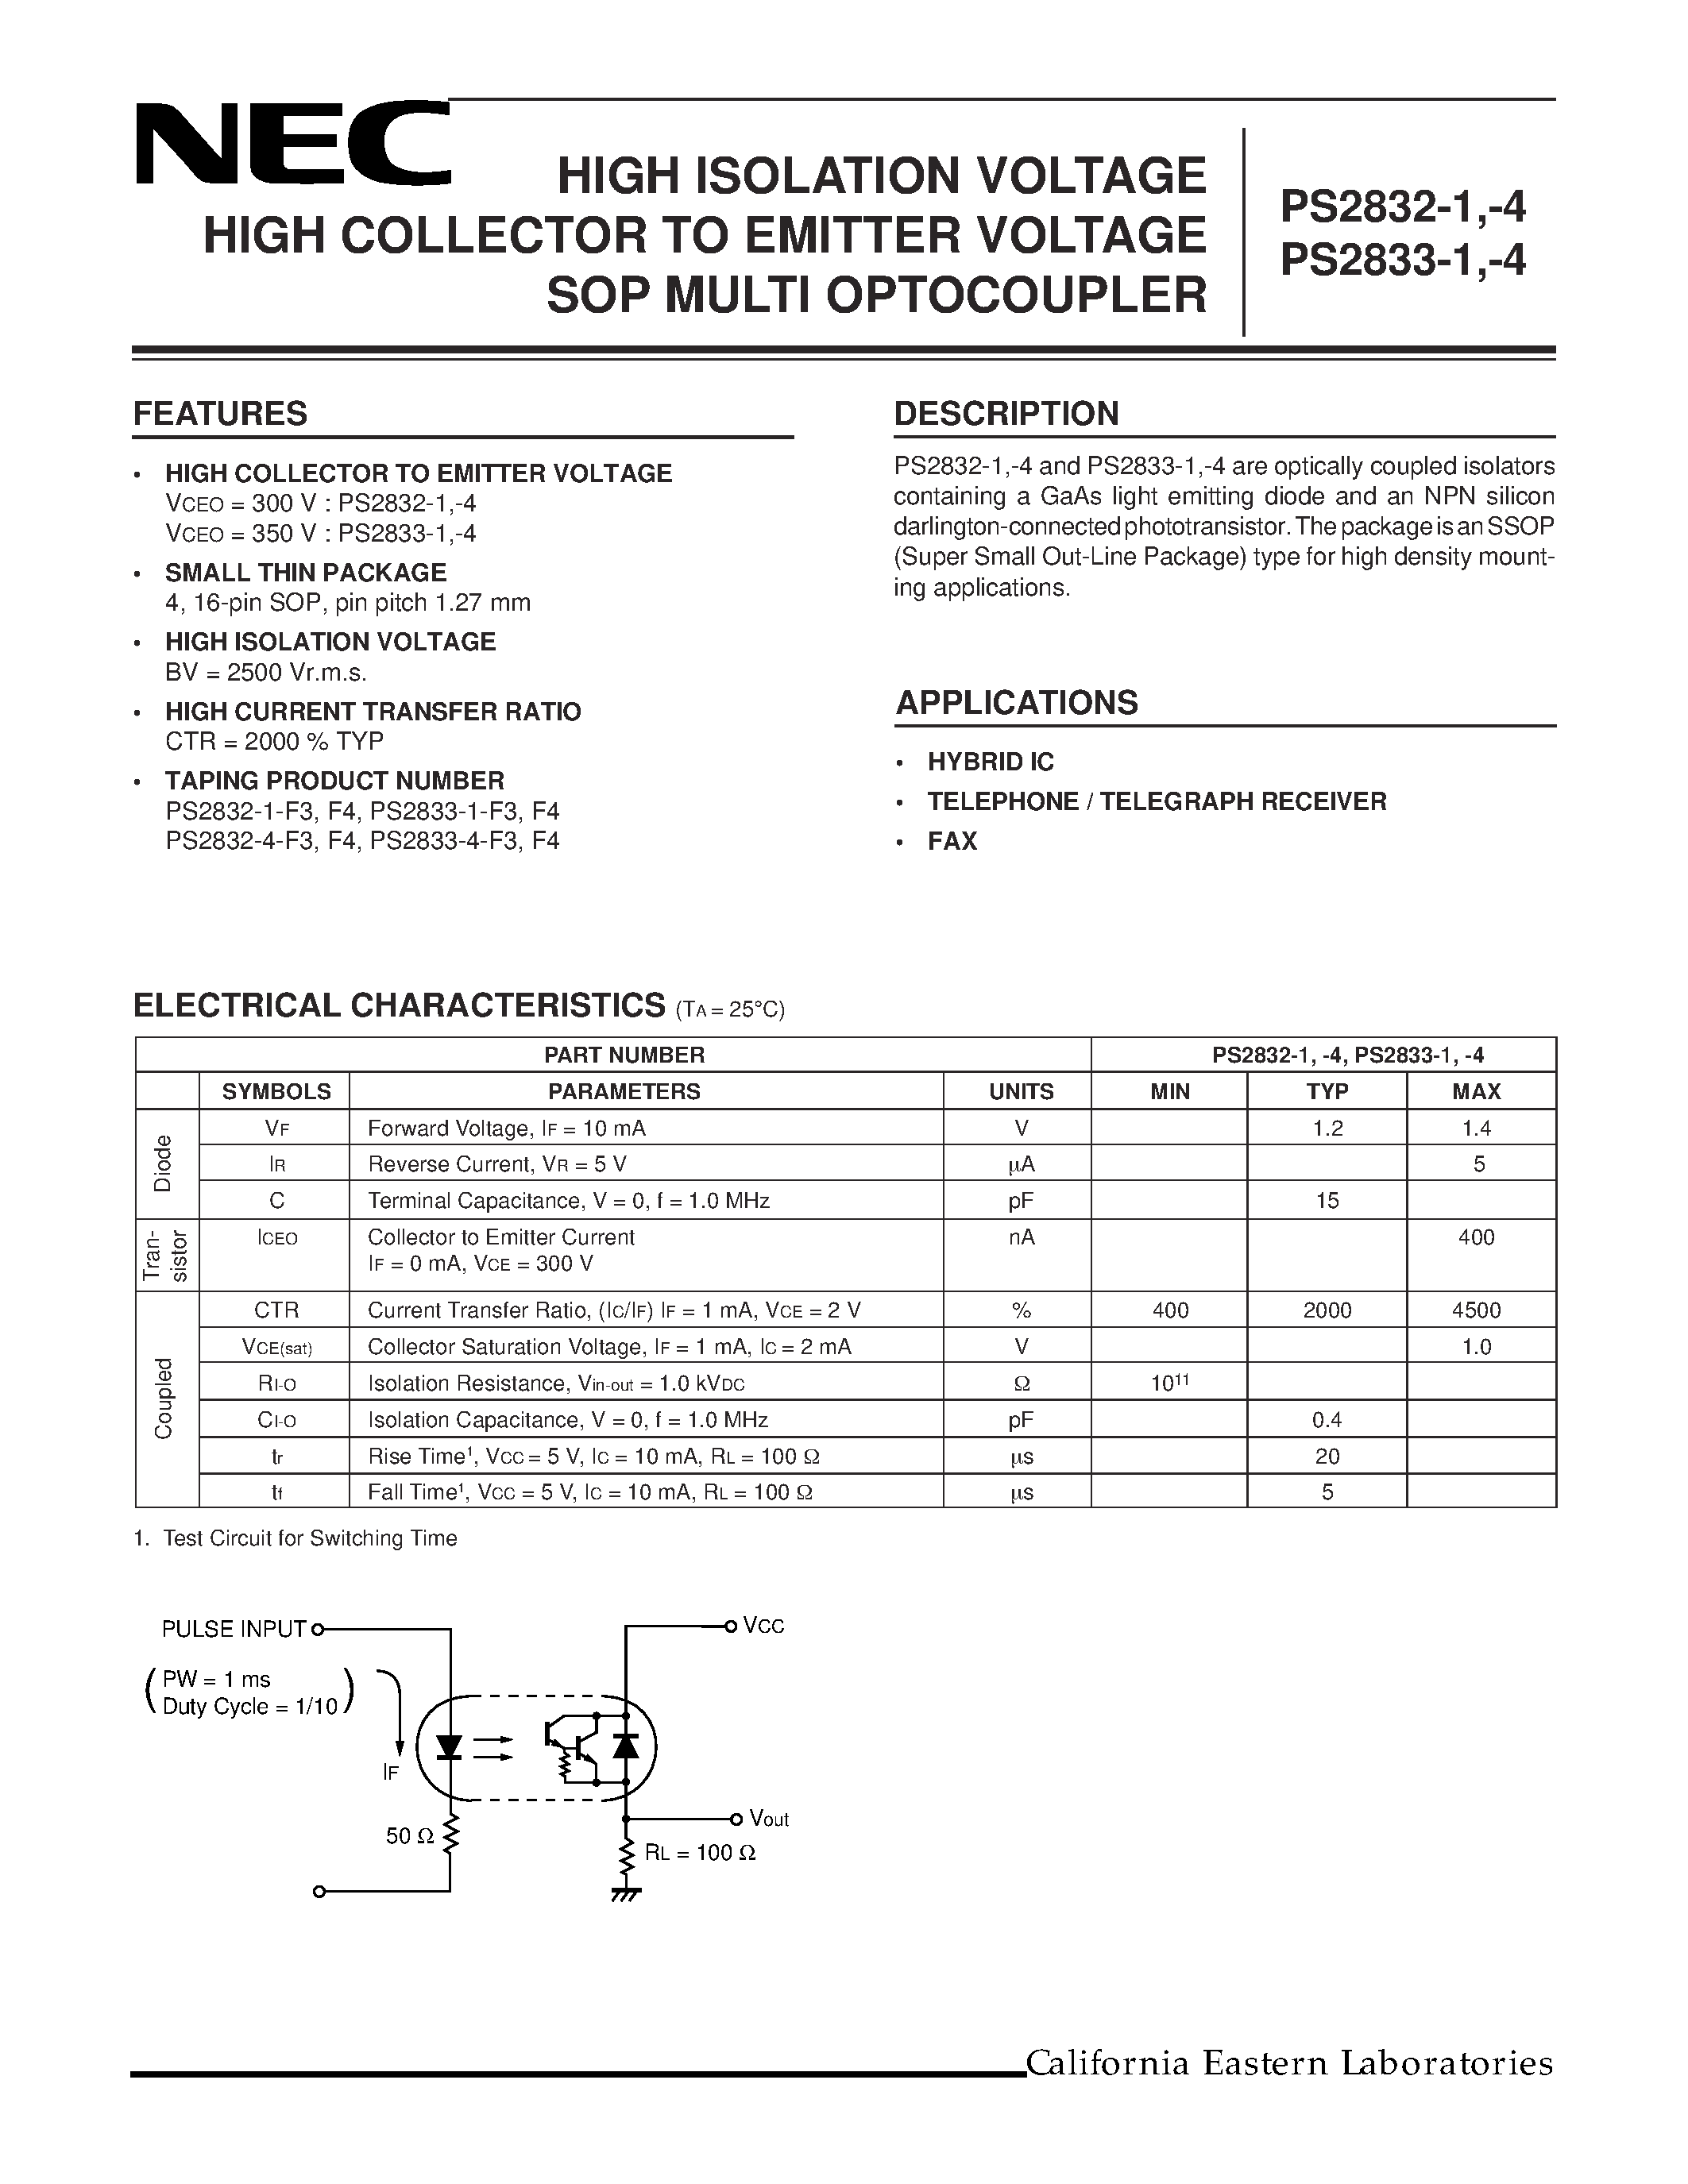 Datasheet PS2833-4-V-F3 - HIGH ISOLATION VOLTAGE HIGH COLLECTOR TO EMITTER VOLTAGE SOP MULTI OPTOCOUPLER page 1